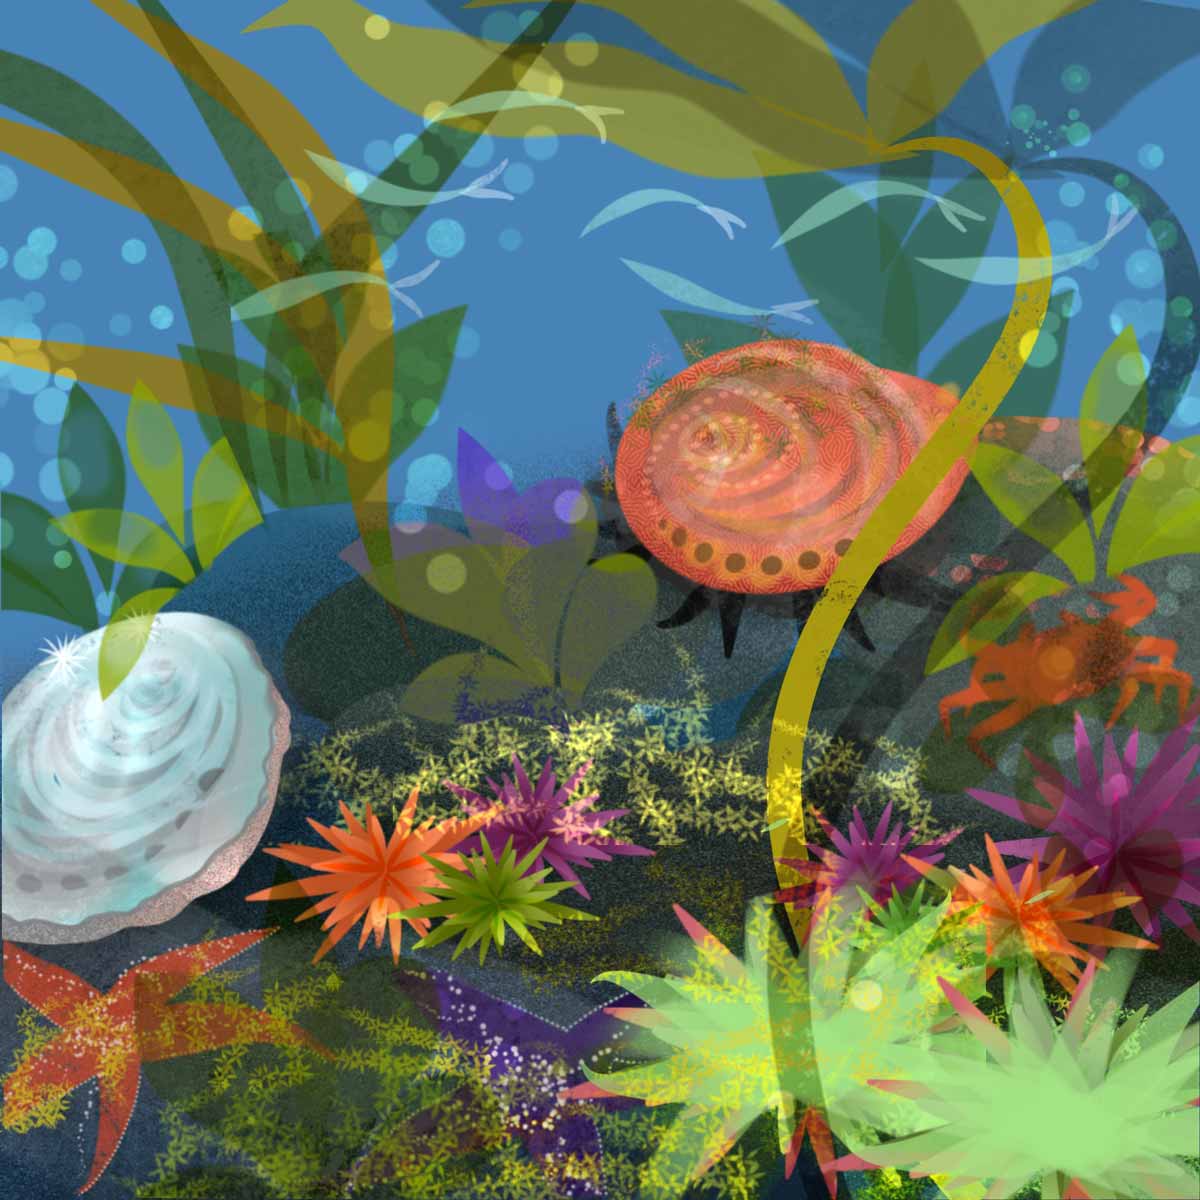 Colorful artwork of underwater scene with abalones